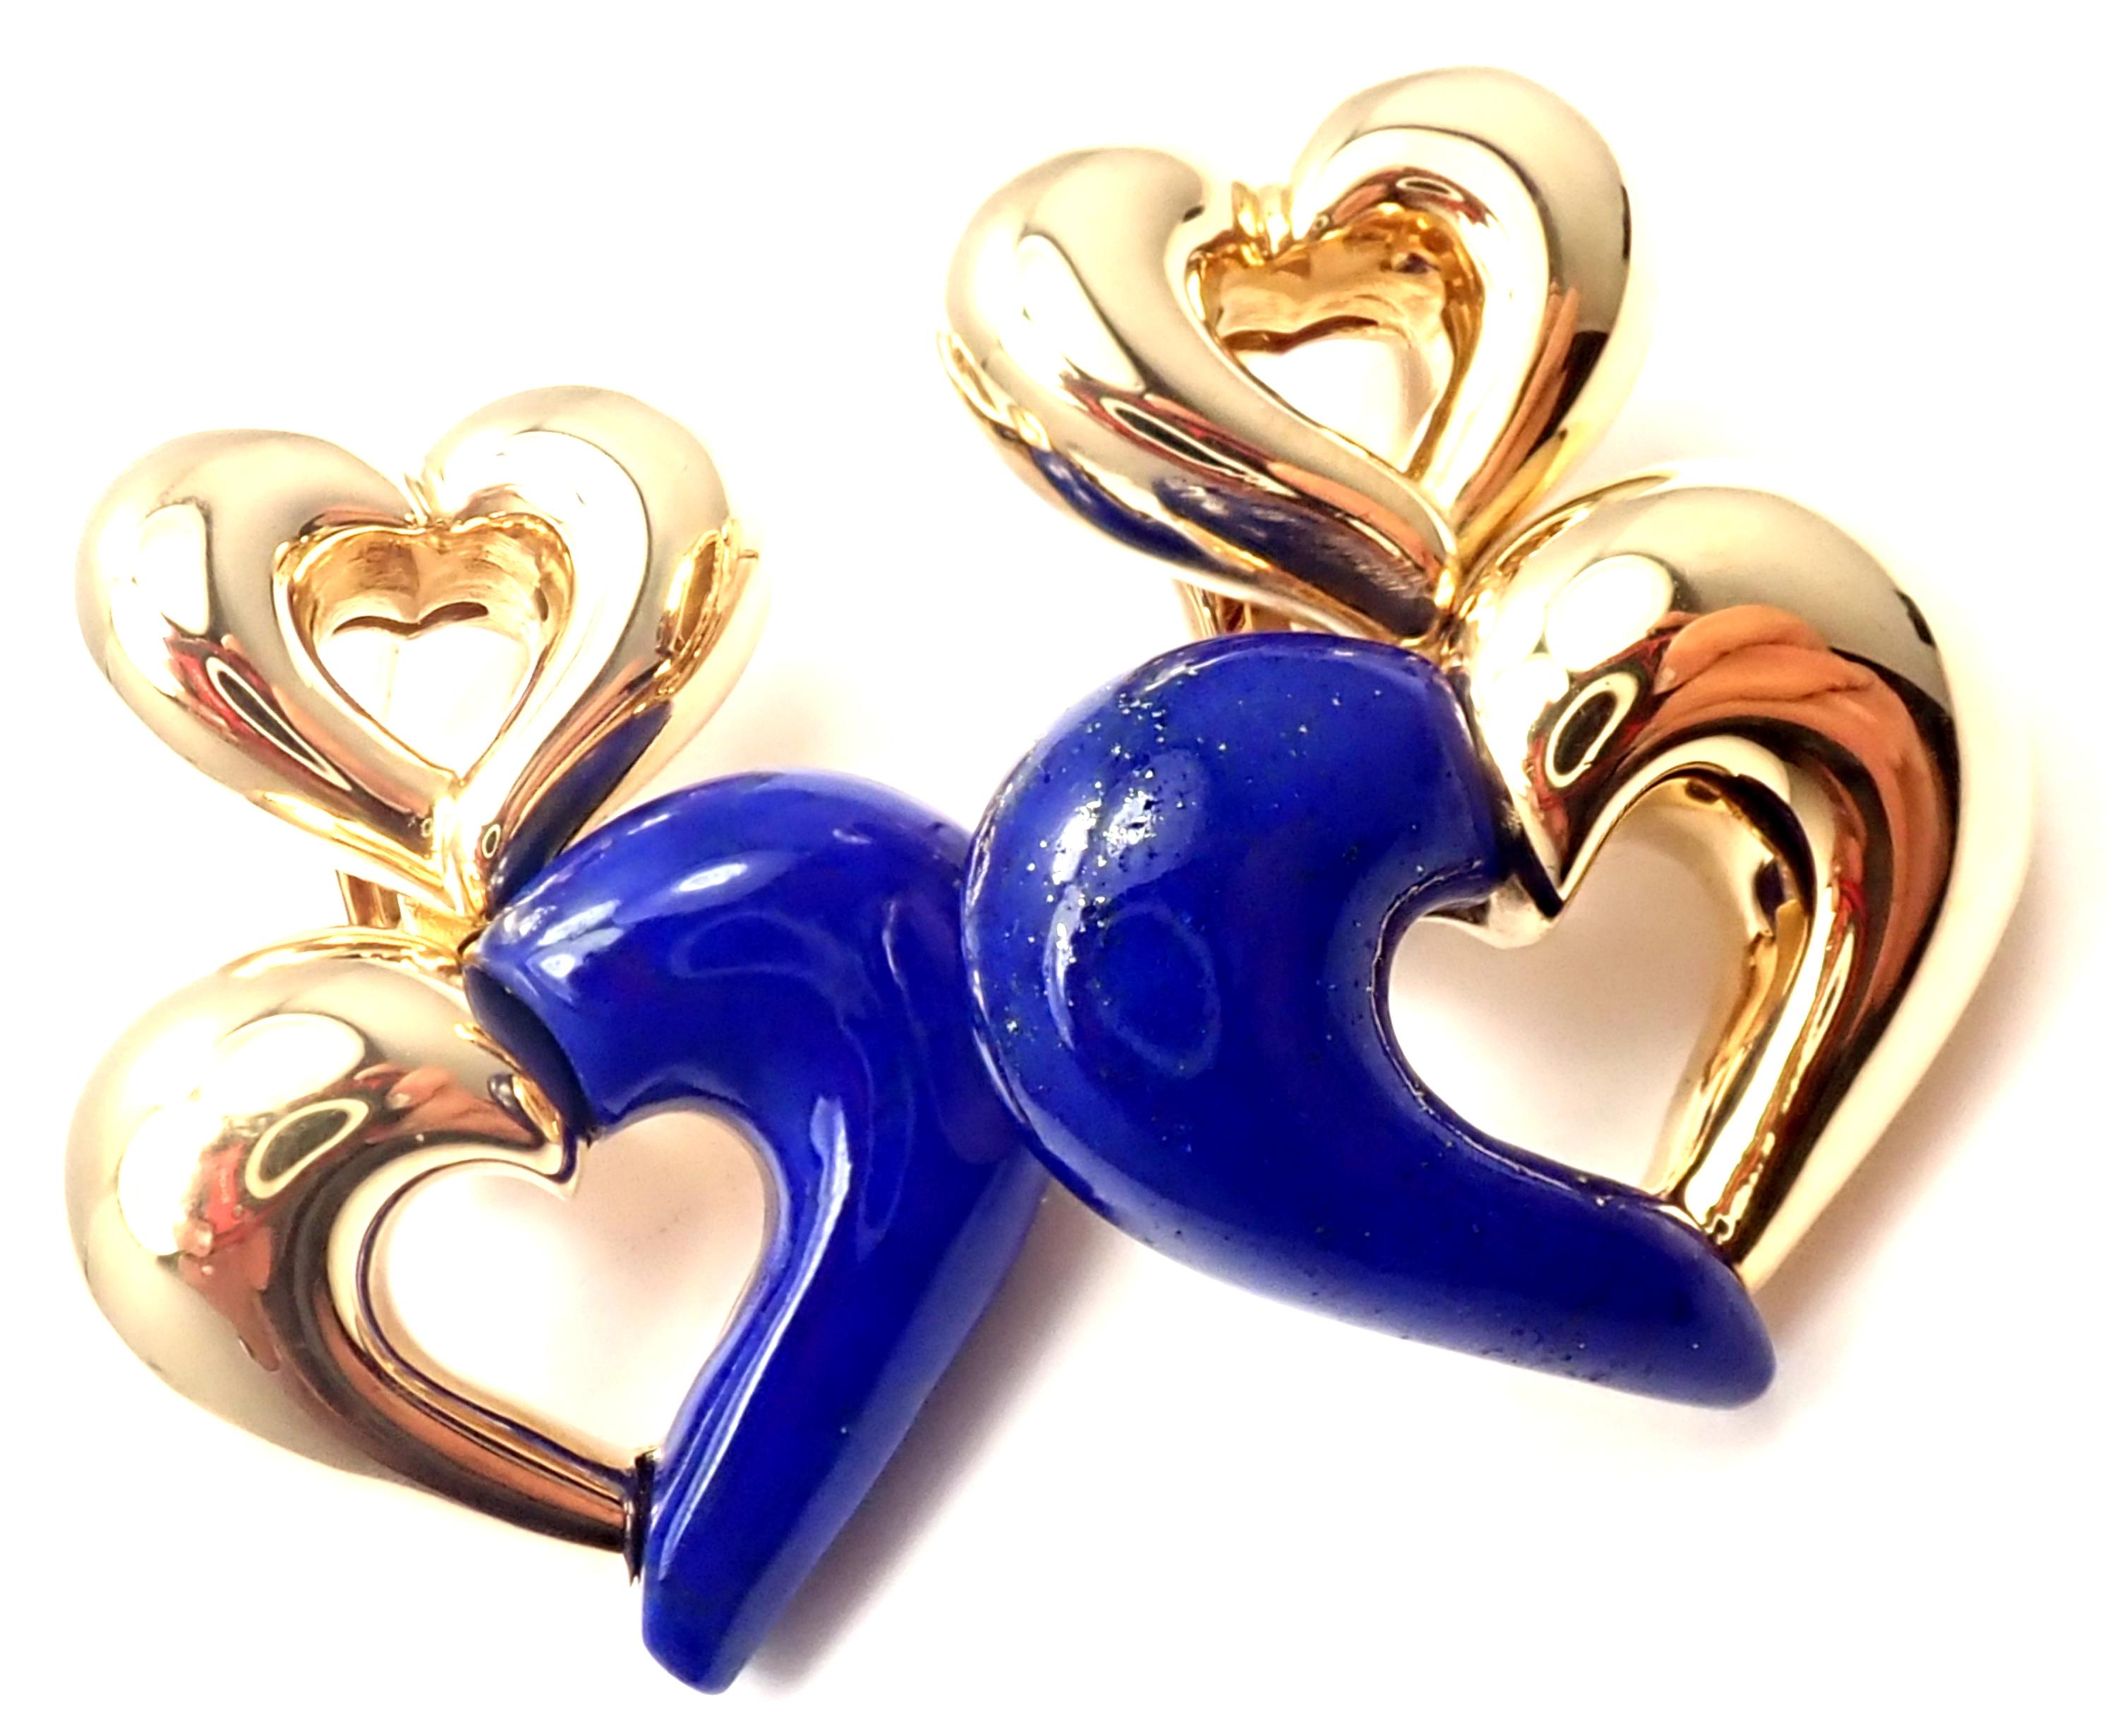 18k Yellow Gold Lapis Lazuli Heart Shape Earrings by Van Cleef & Arpels. 
With 2 Lapis Lazuli stones
These earrings are made for pierced ears.
Details: 
Weight: 28.5 grams
Measurements: 30mm x 23mm
Stamped Hallmarks: VCA 750 CR03.05LA8
*Free